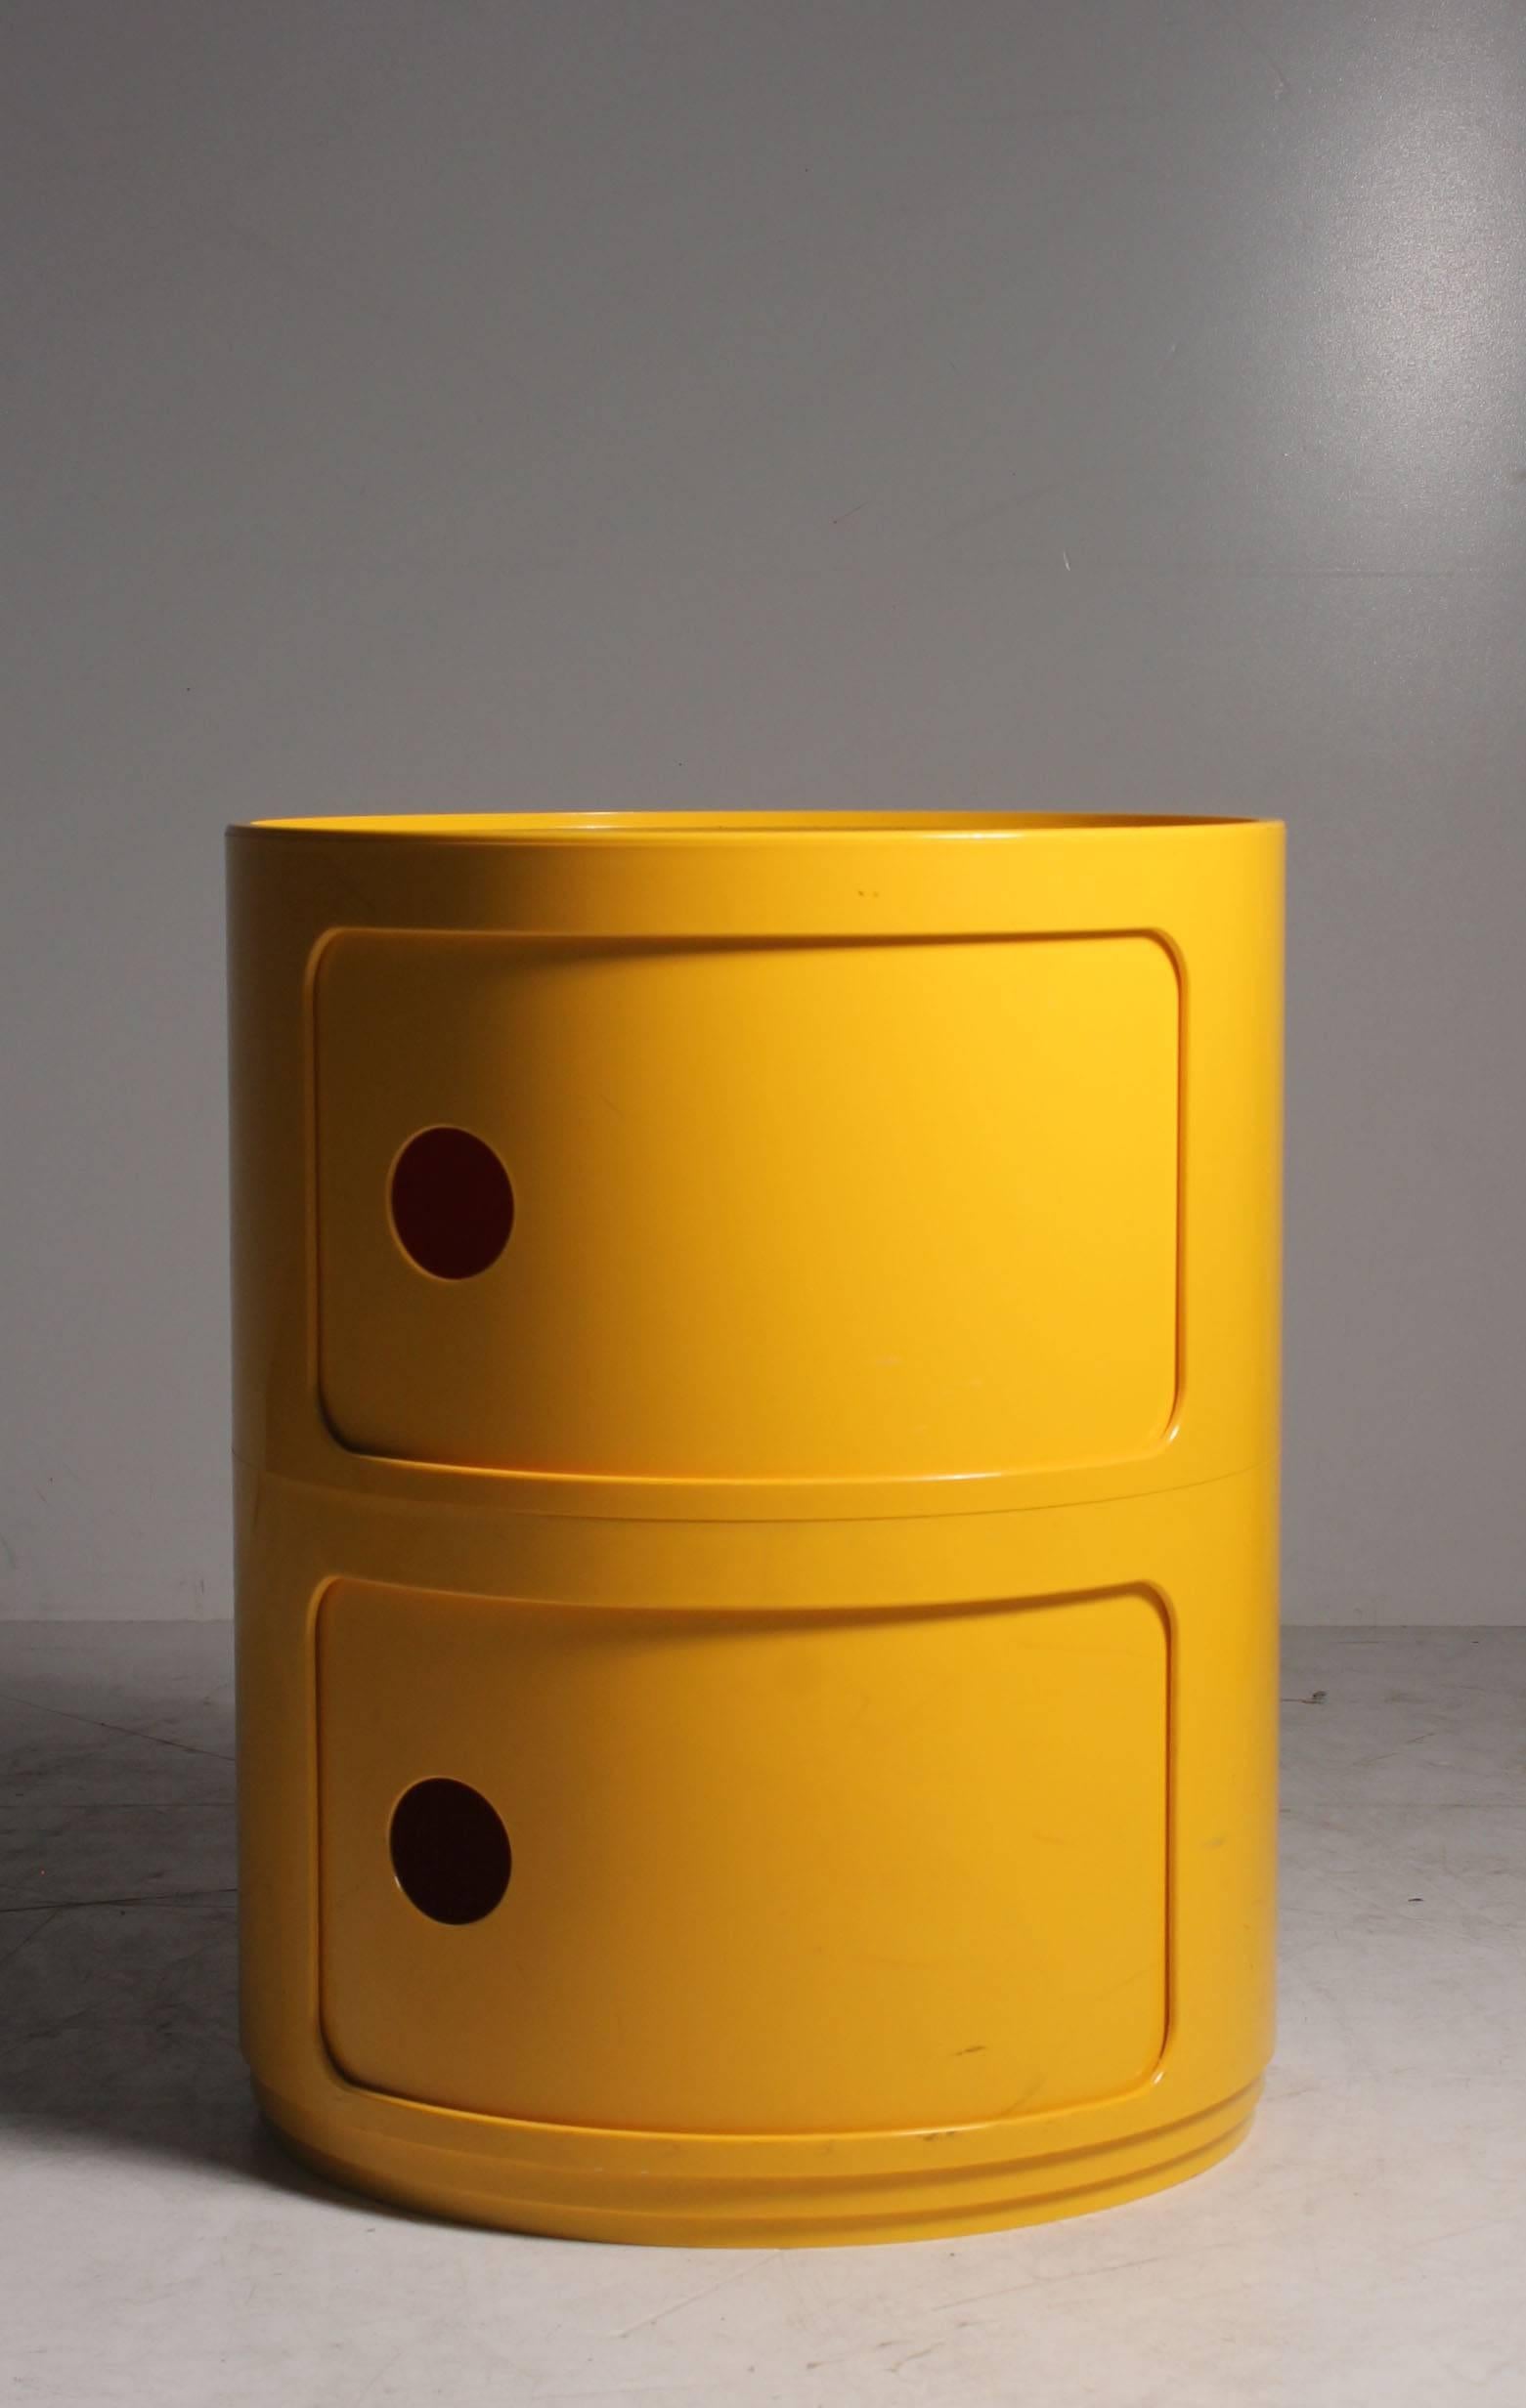 Pair of Anna Castelli Kartell yellow plastic stacking storage nightstands or end tables.
These can also be stacked on top of one another to be four units tall.
Space age or POP culture, 1970s-1980s.

Each nightstand is 15.5" tall.

Signed